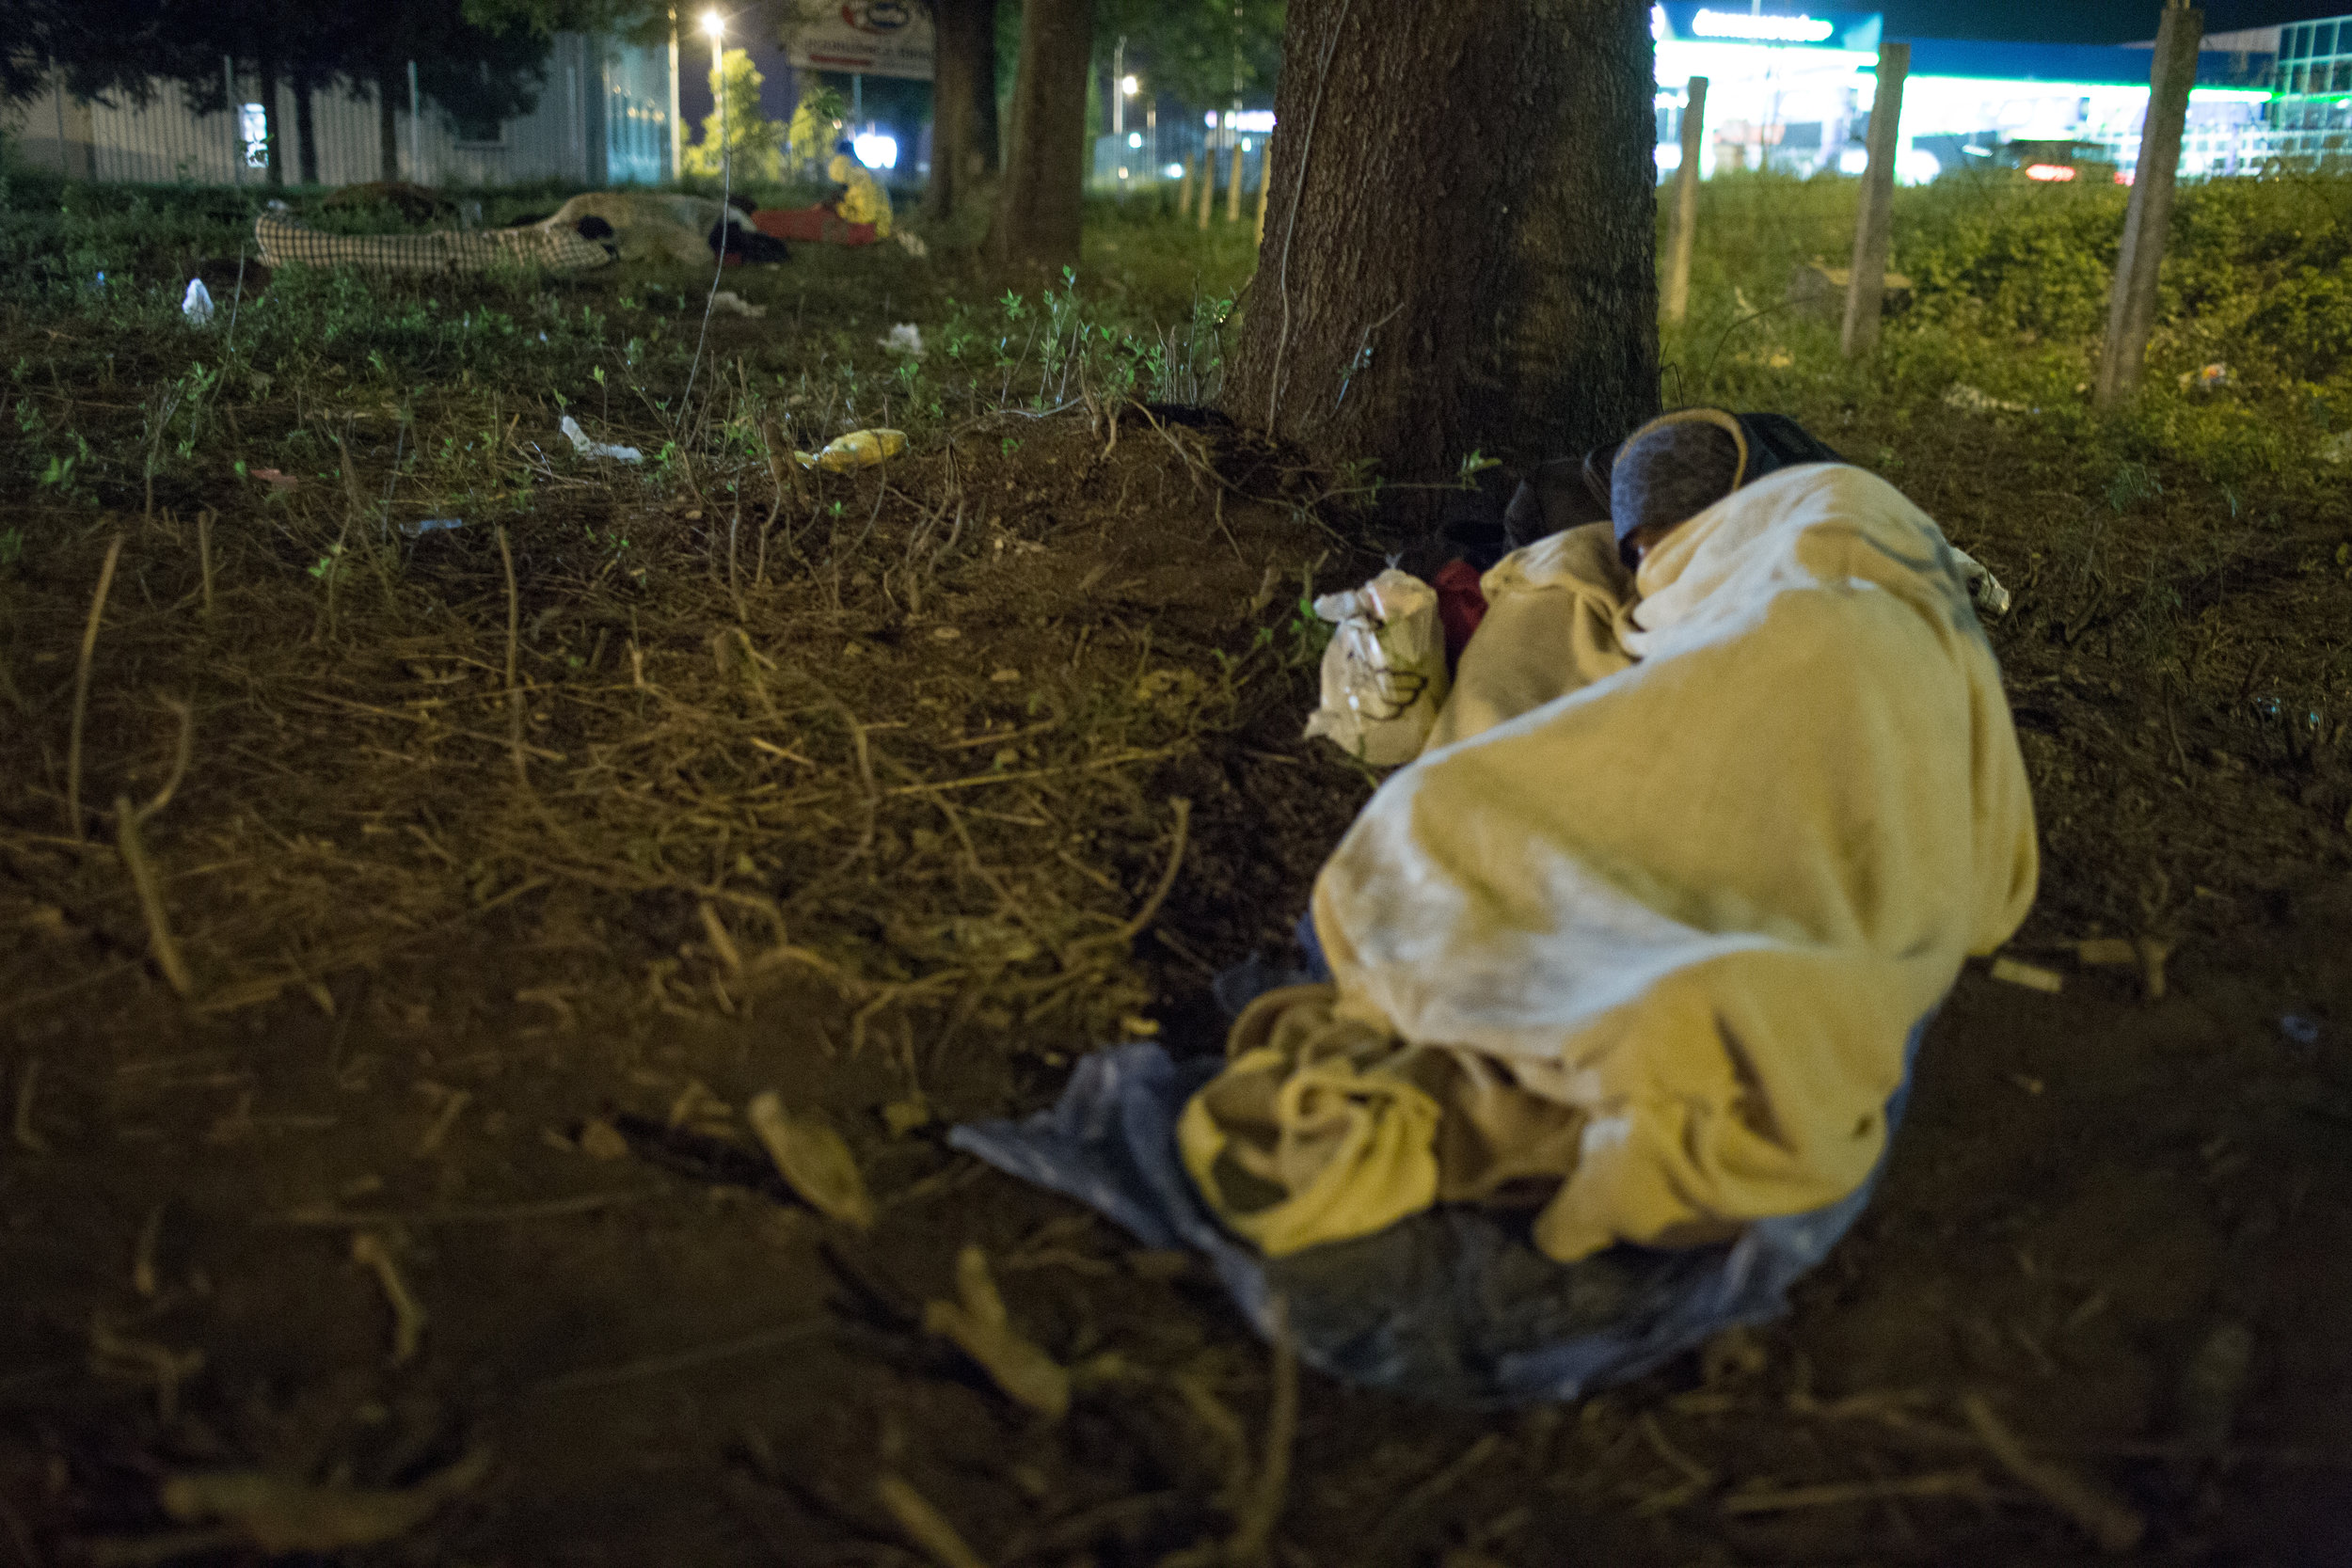  For many migrants, there is no space in the migrant center and they are forced to sleep outdoors, Bihać, BiH. 